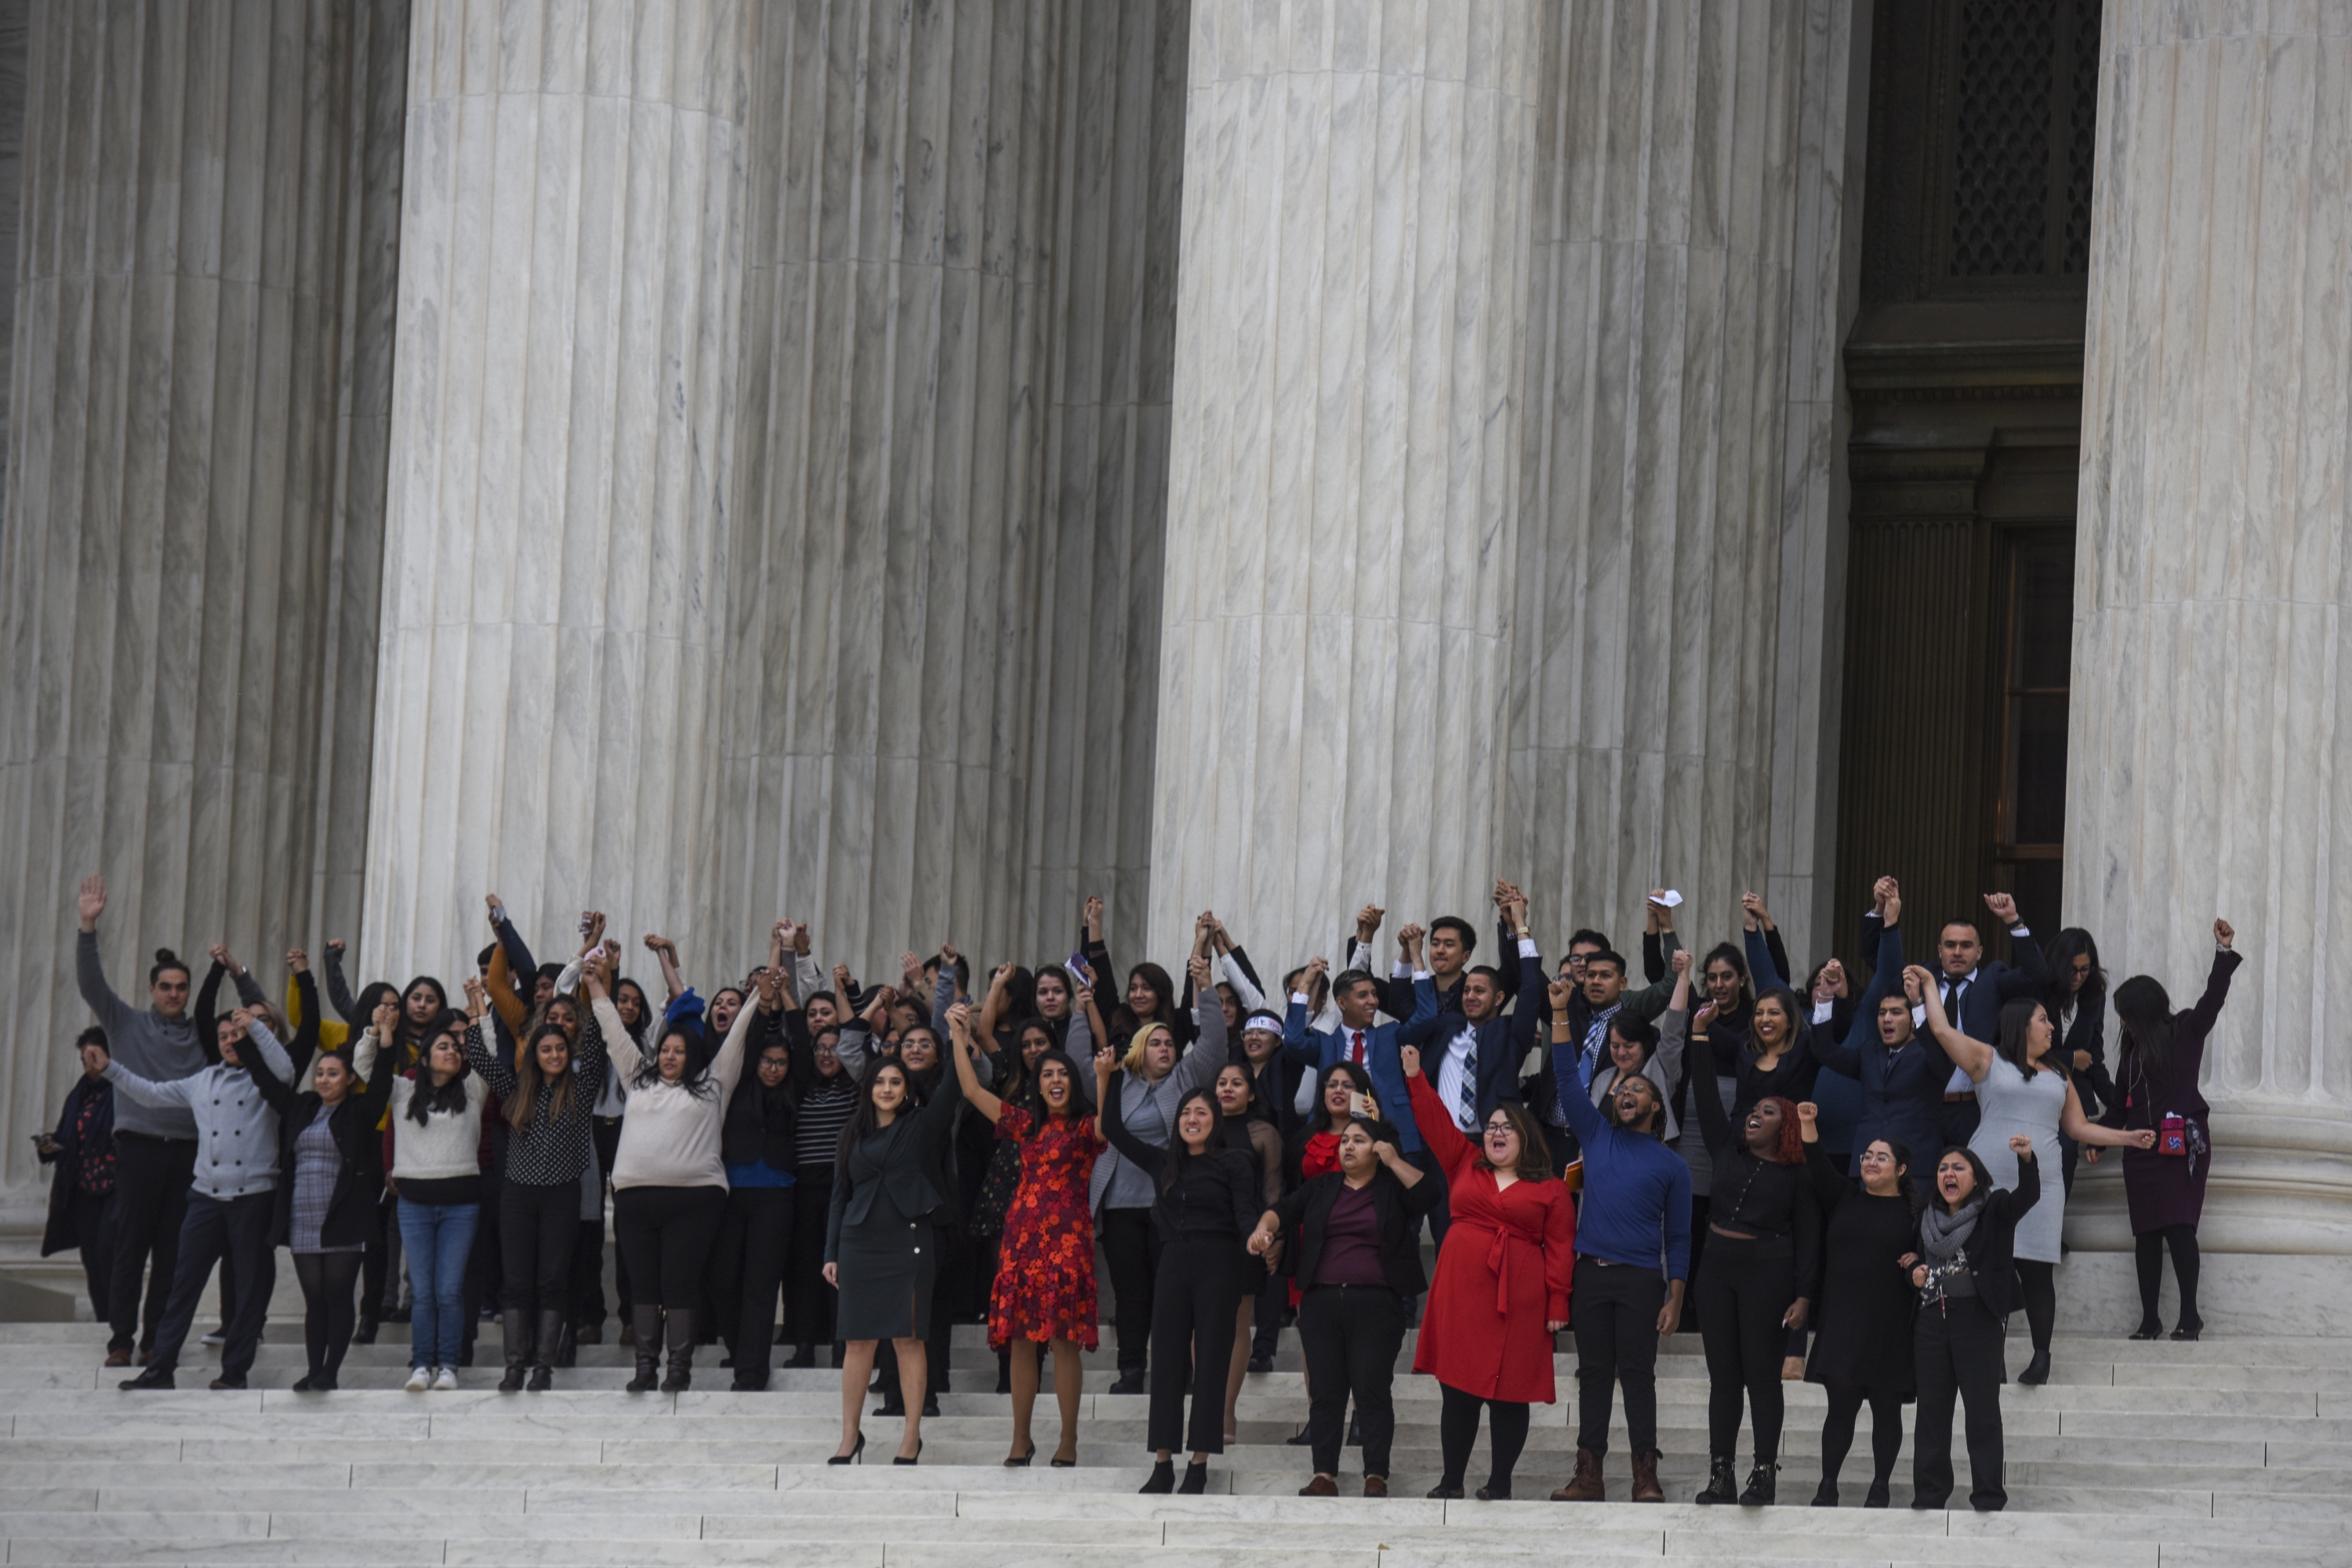 DACA plaintiffs leave the United States Supreme Court, where the Court is hearing arguments on Deferred Action for Childhood Arrivals that could impact the fates of nearly 700,000 young immigrants.  on Nov. 12, 2019, in Washington, D.C. (Jahi Chikwendiu—The Washington Post/Getty Images)